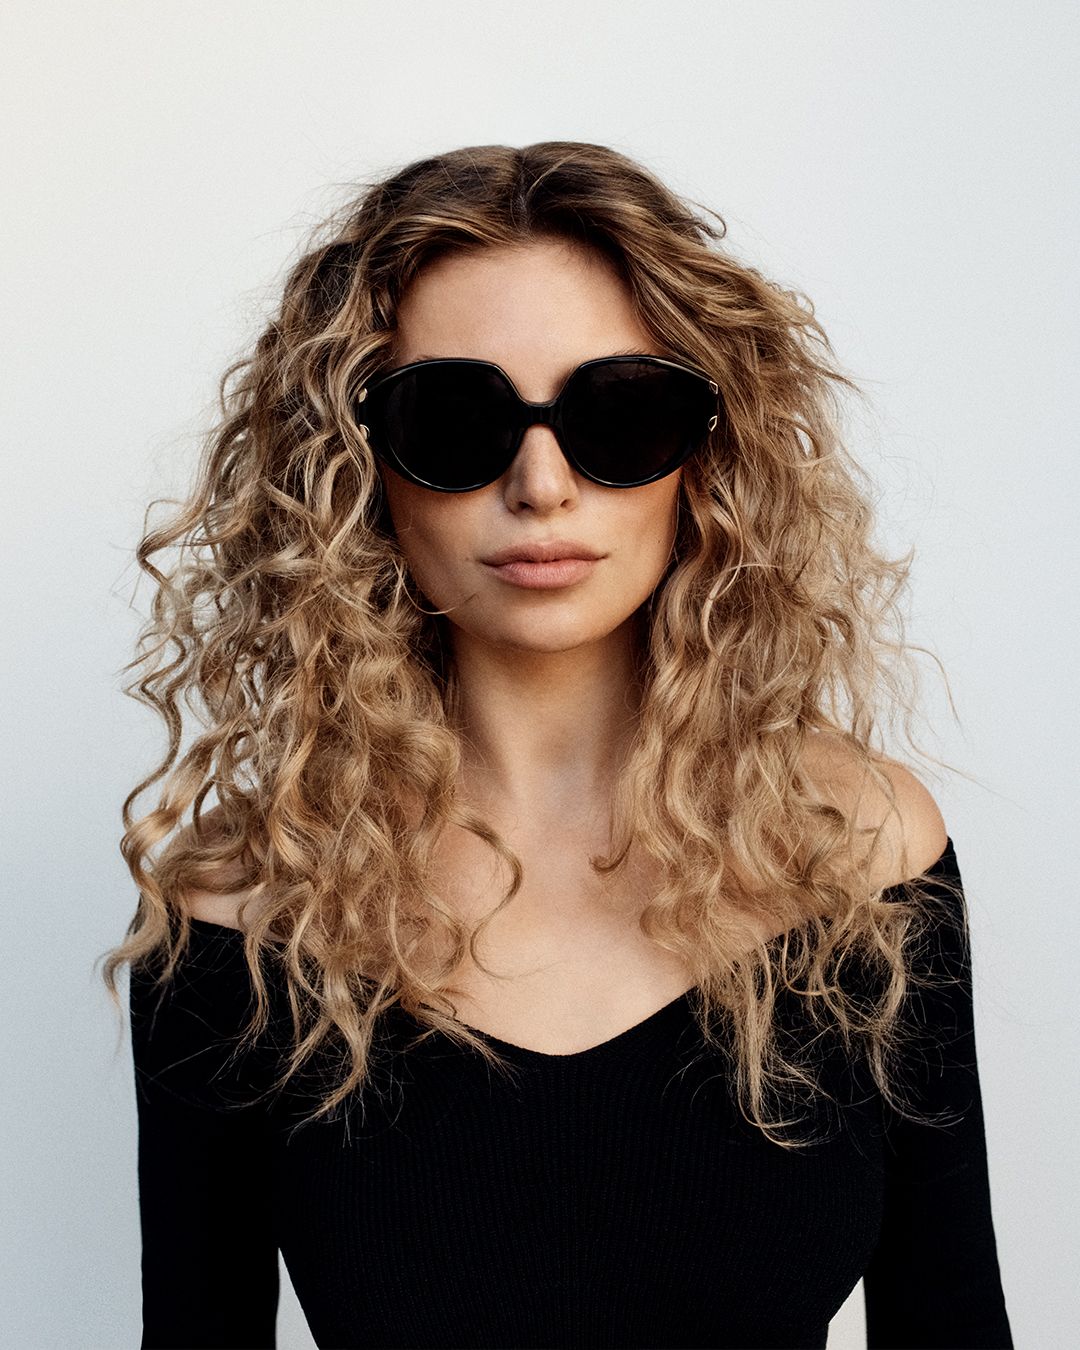 Model with blonde curly hair wearing black round sunglasses